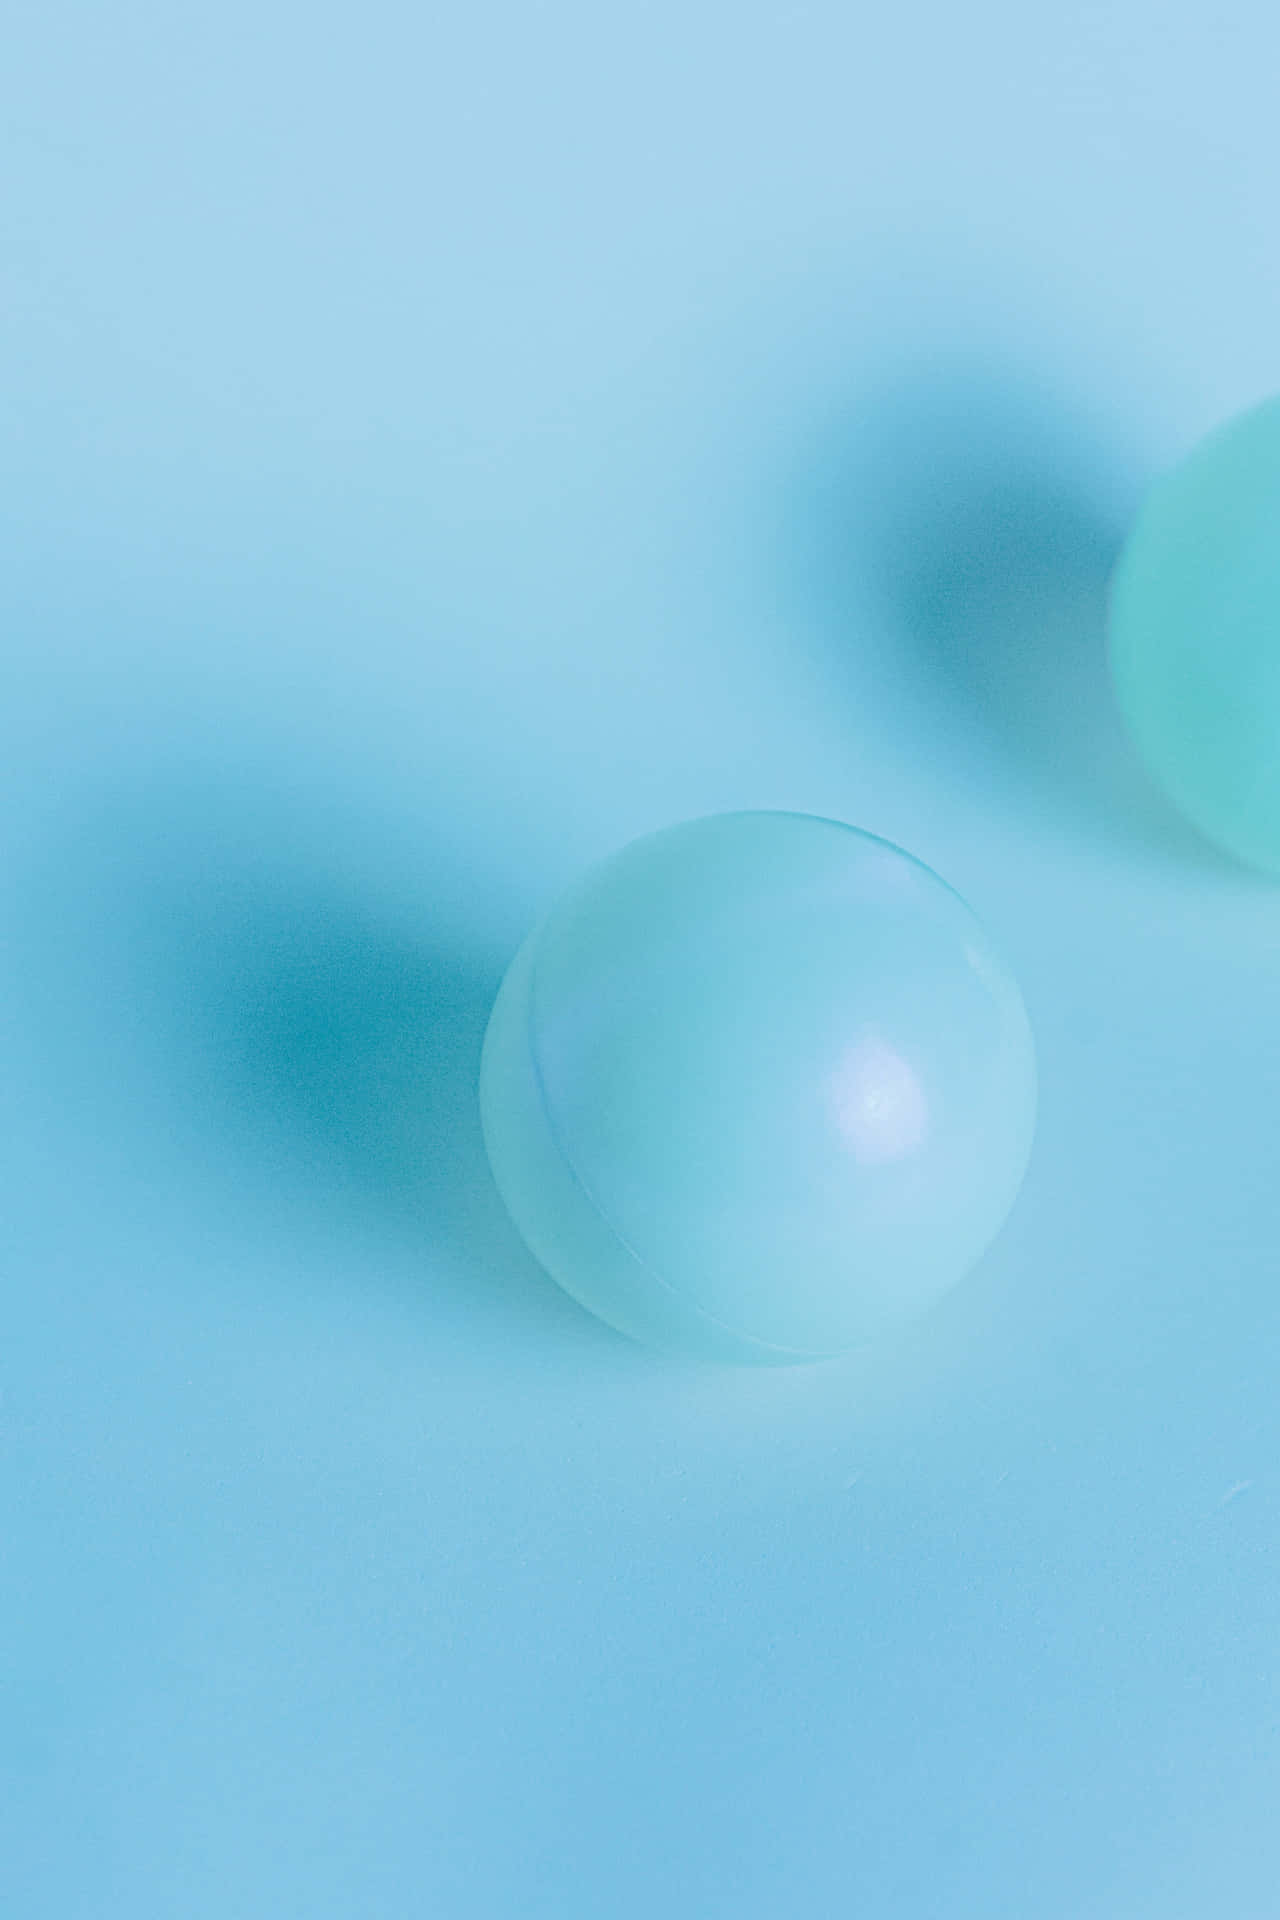 Cool Light Blue Marbles On Surface Wallpaper